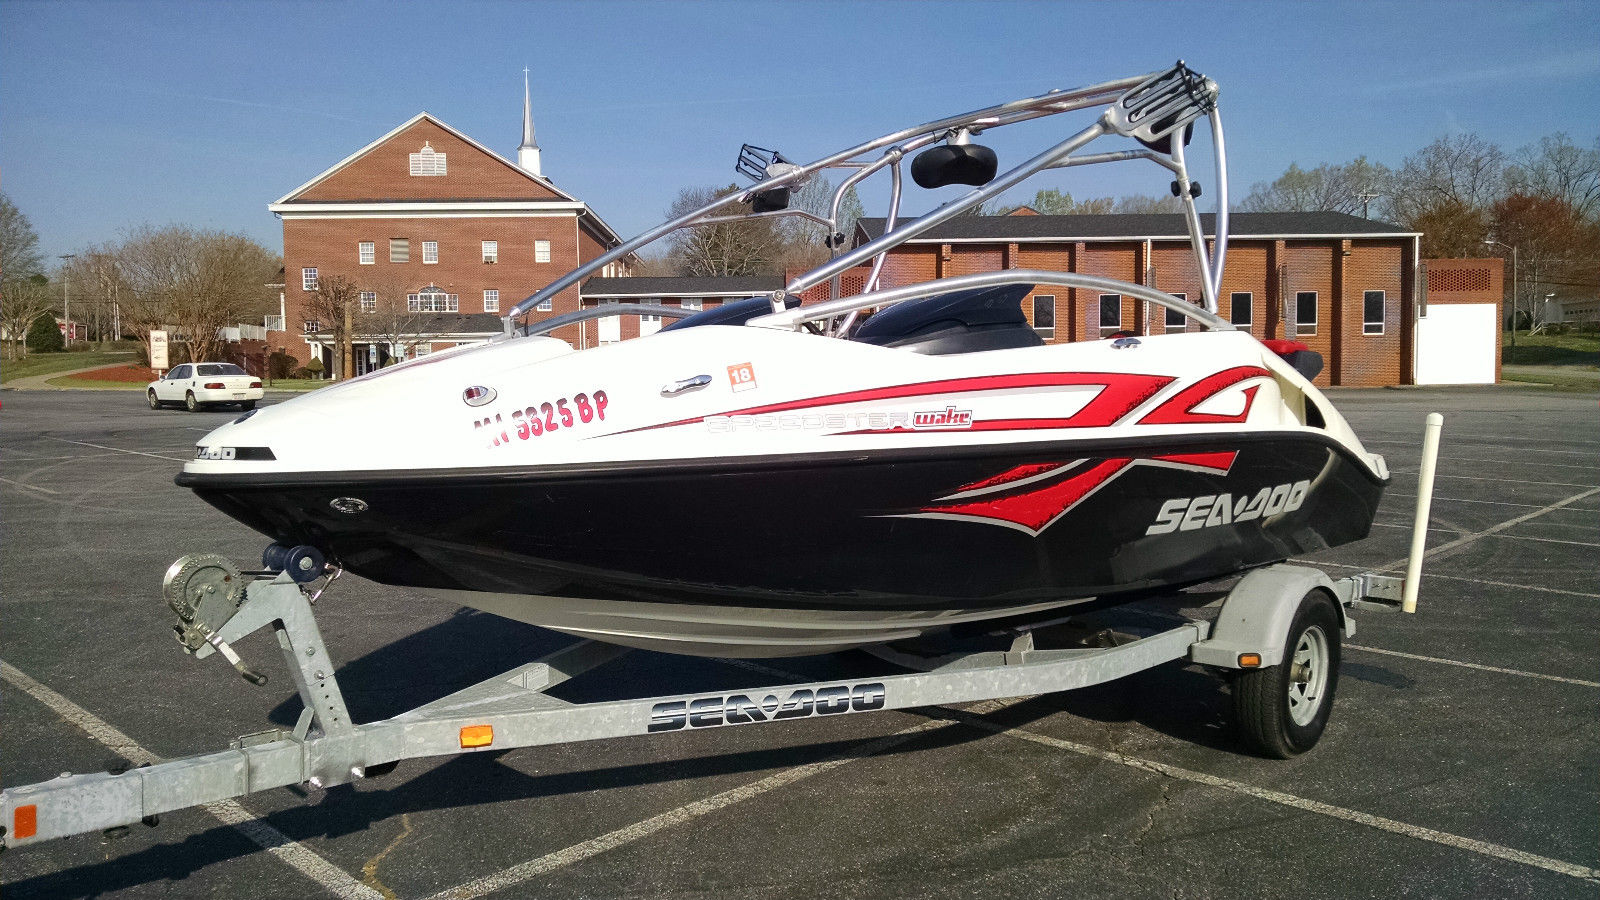 Sea Doo SPEEDSTER WAKE 2007 for sale for $200 - Boats-from ...